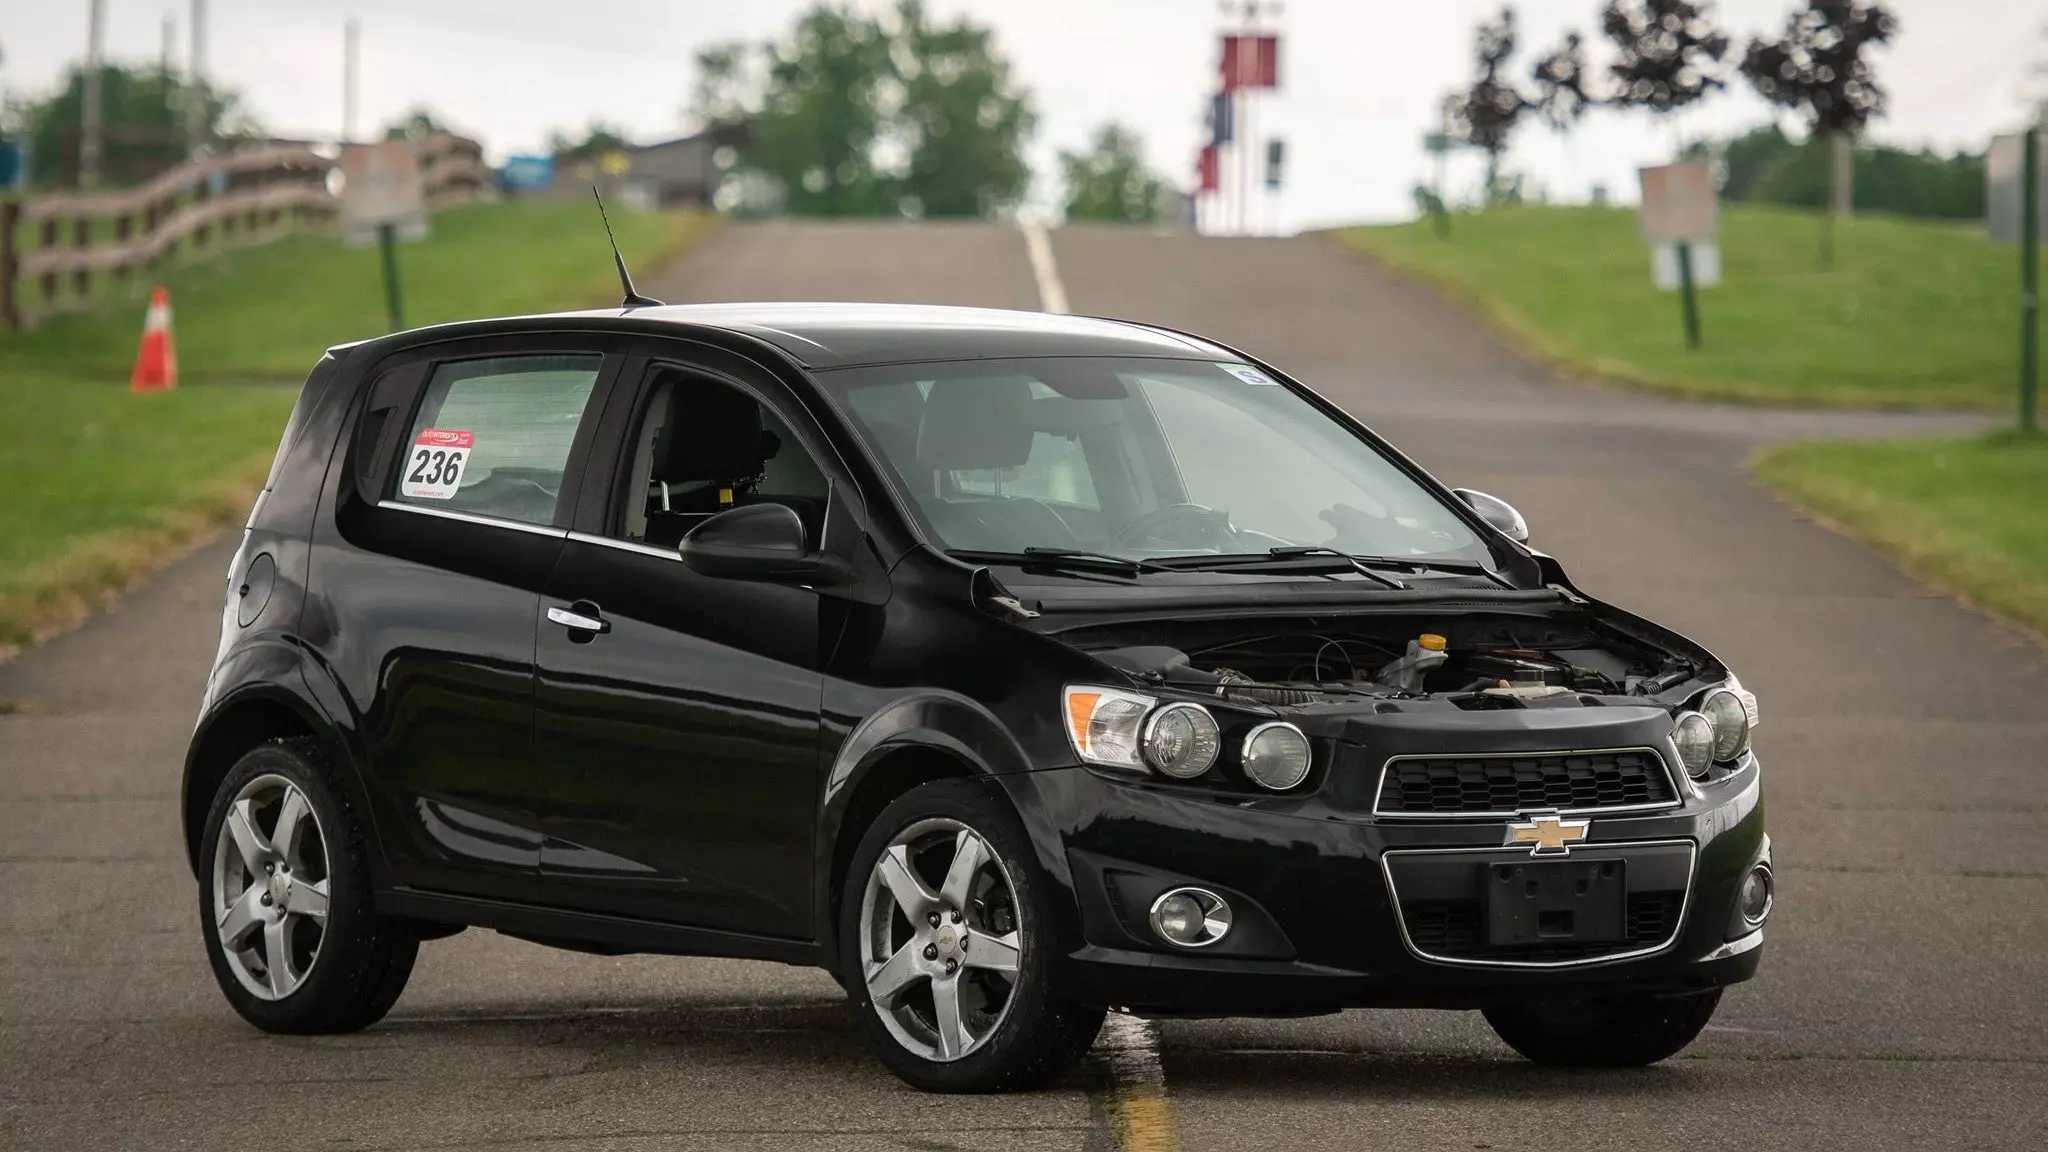 My Old 200,000-Mile Chevy Sonic Got a Second Life as a Track Toy | Autance